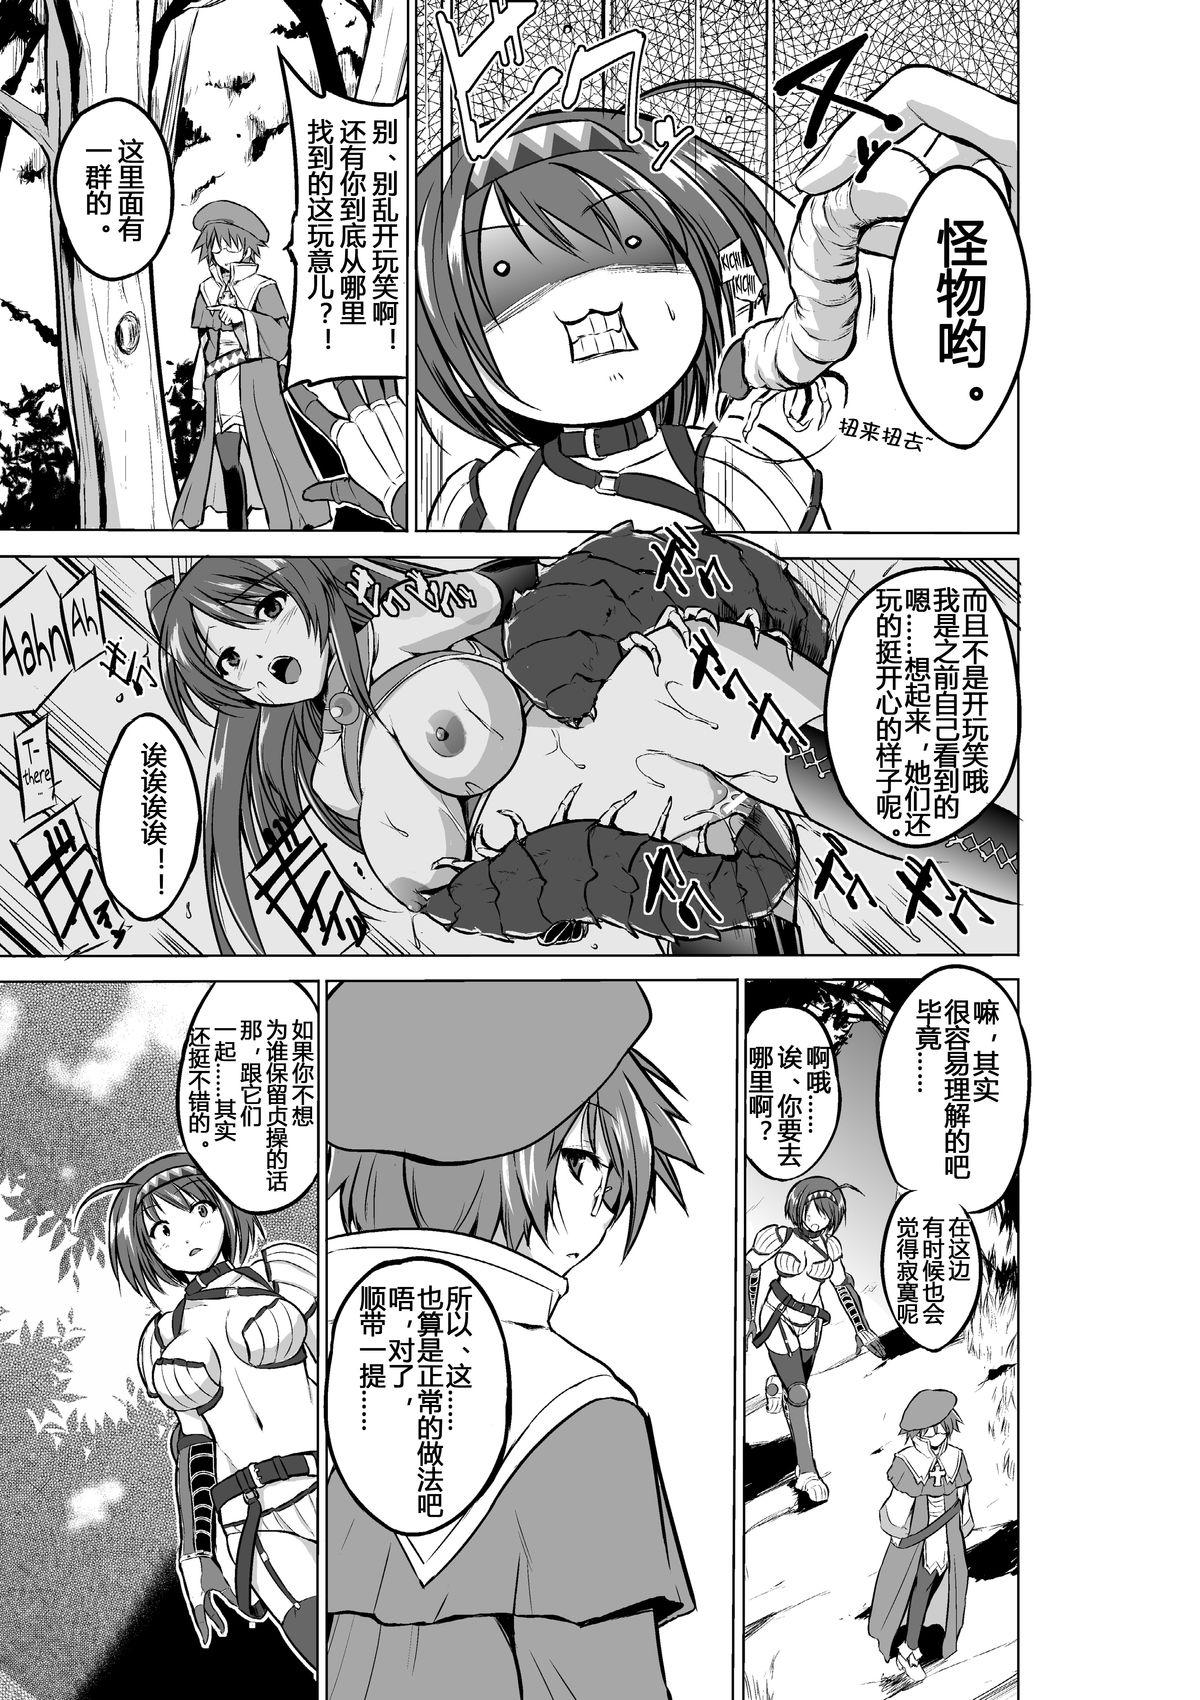 Jerk Dungeon Travelers - Chie no Himegoto - Toheart2 Xxx - Page 5